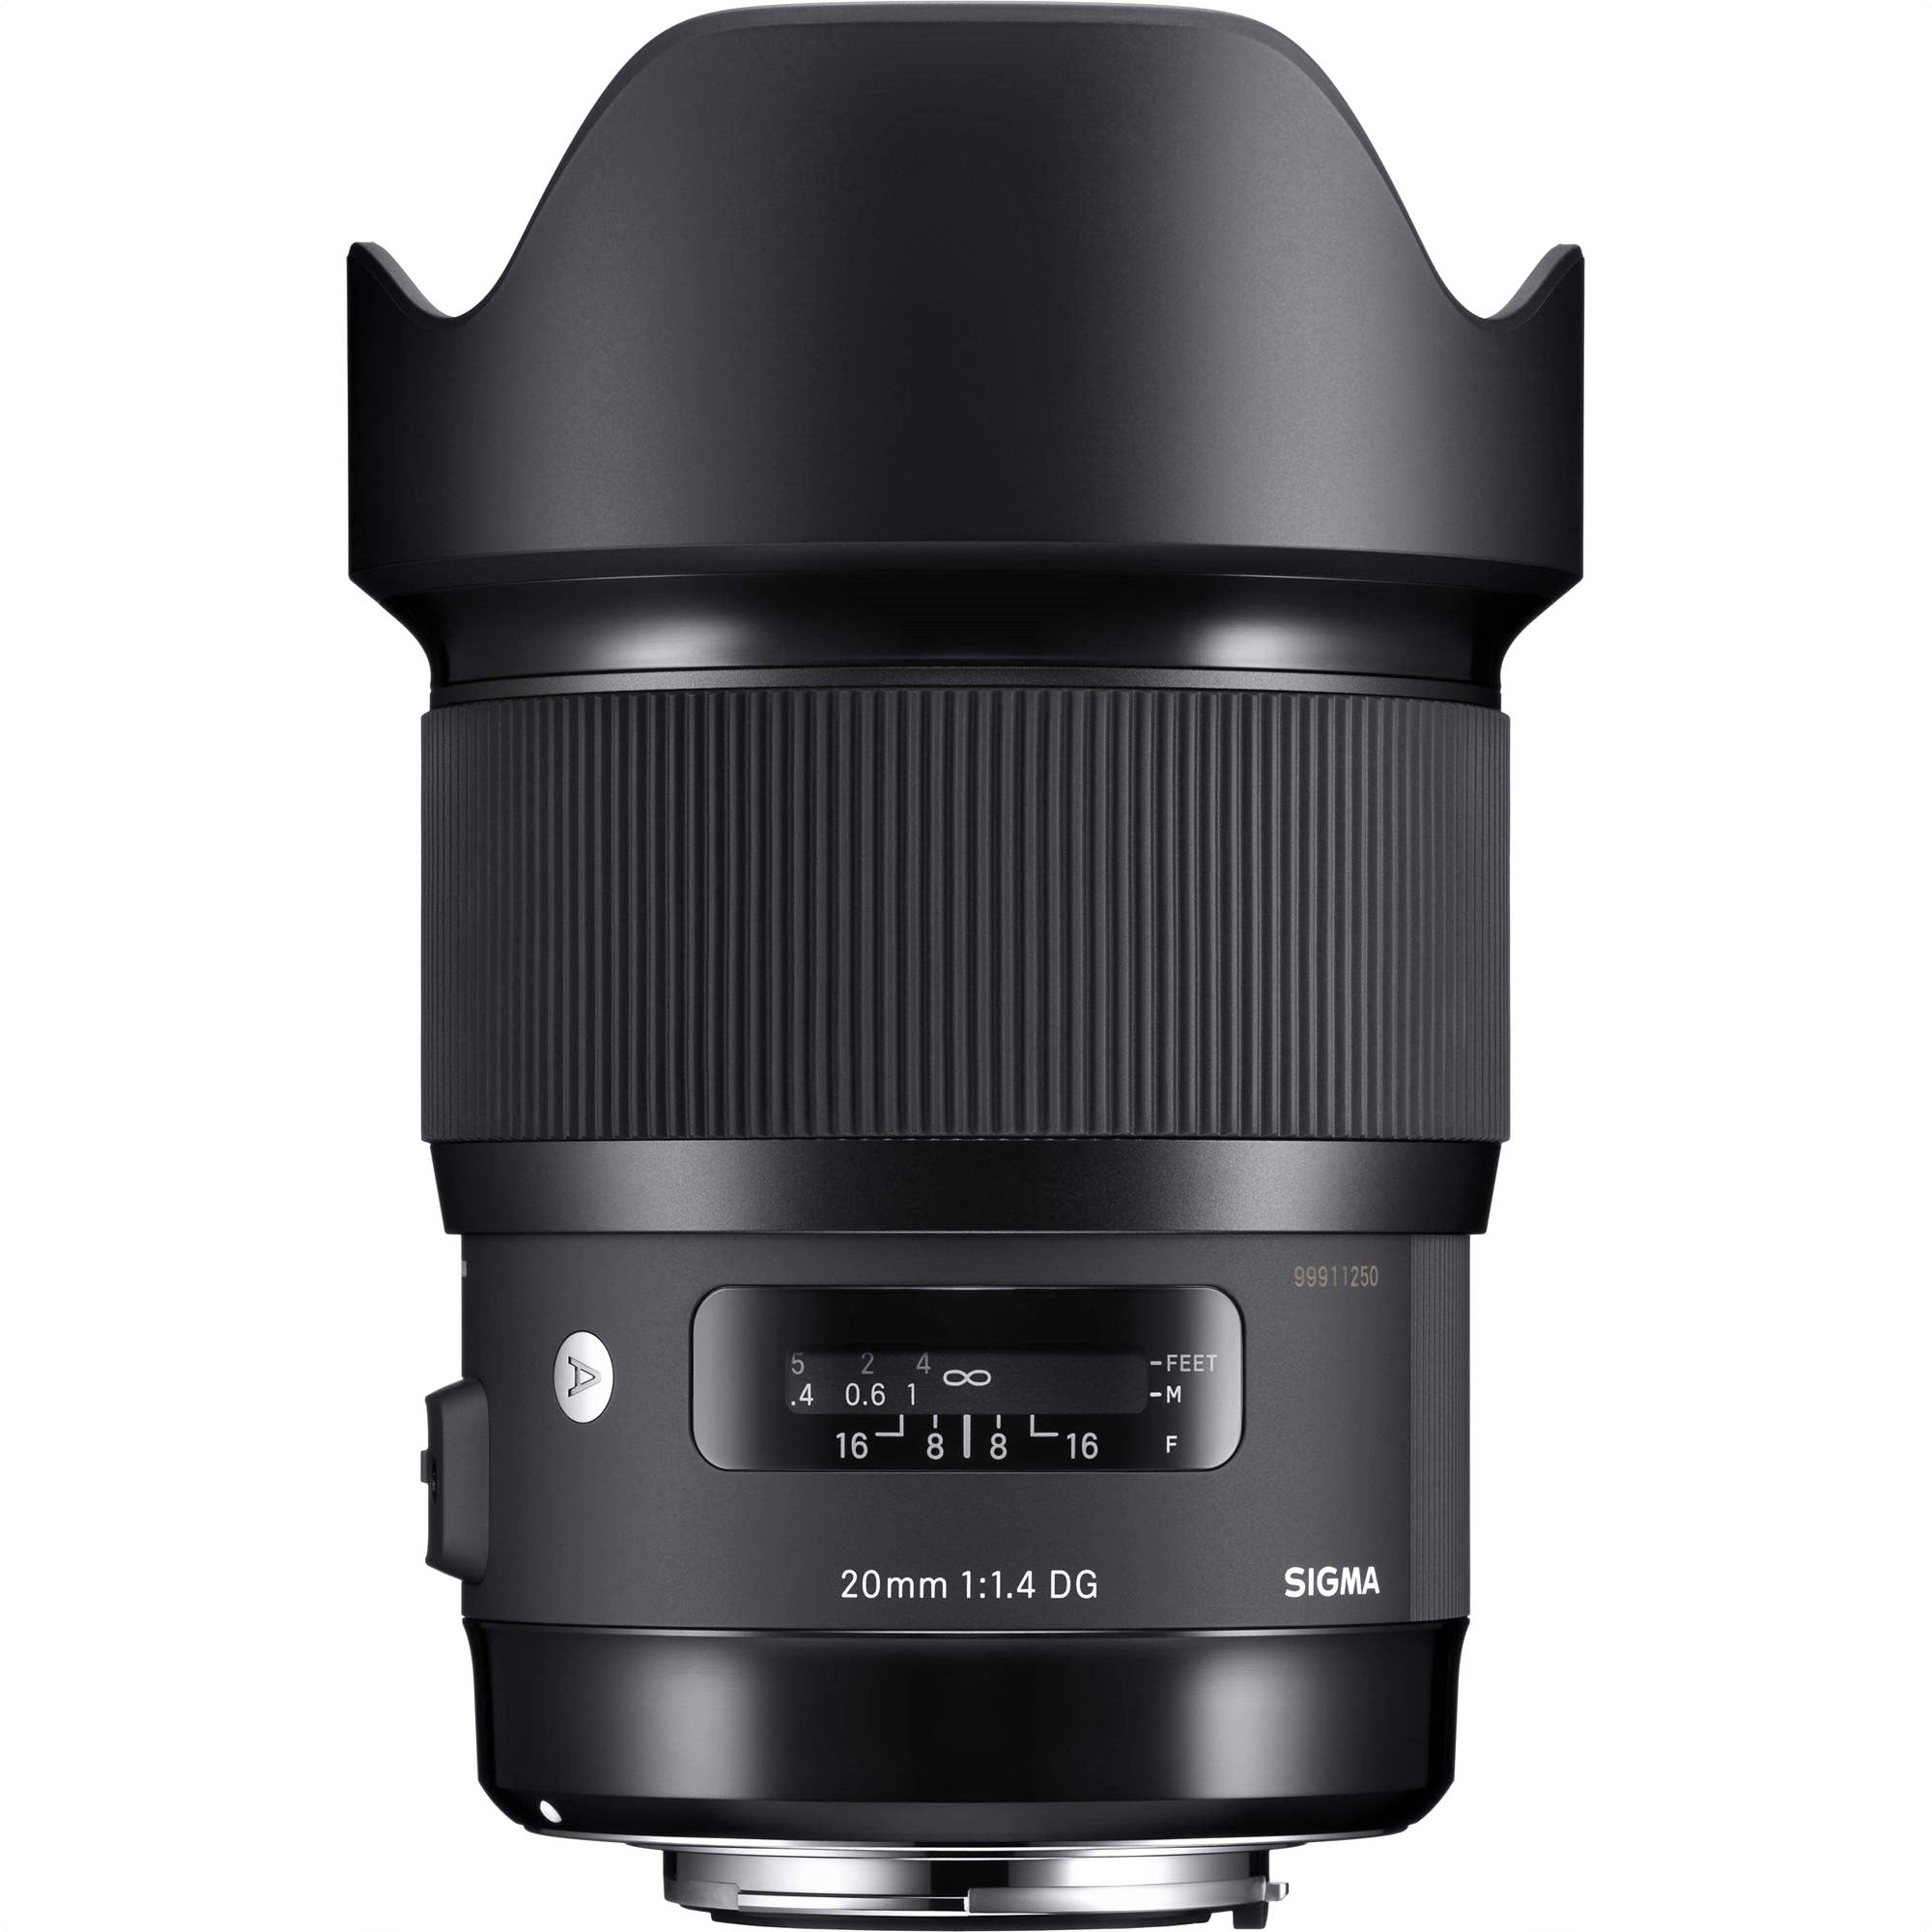 Sigma 20mm F1.4 DG HSM Art Lens for Nikon F with Attached Lens Hood on the Top